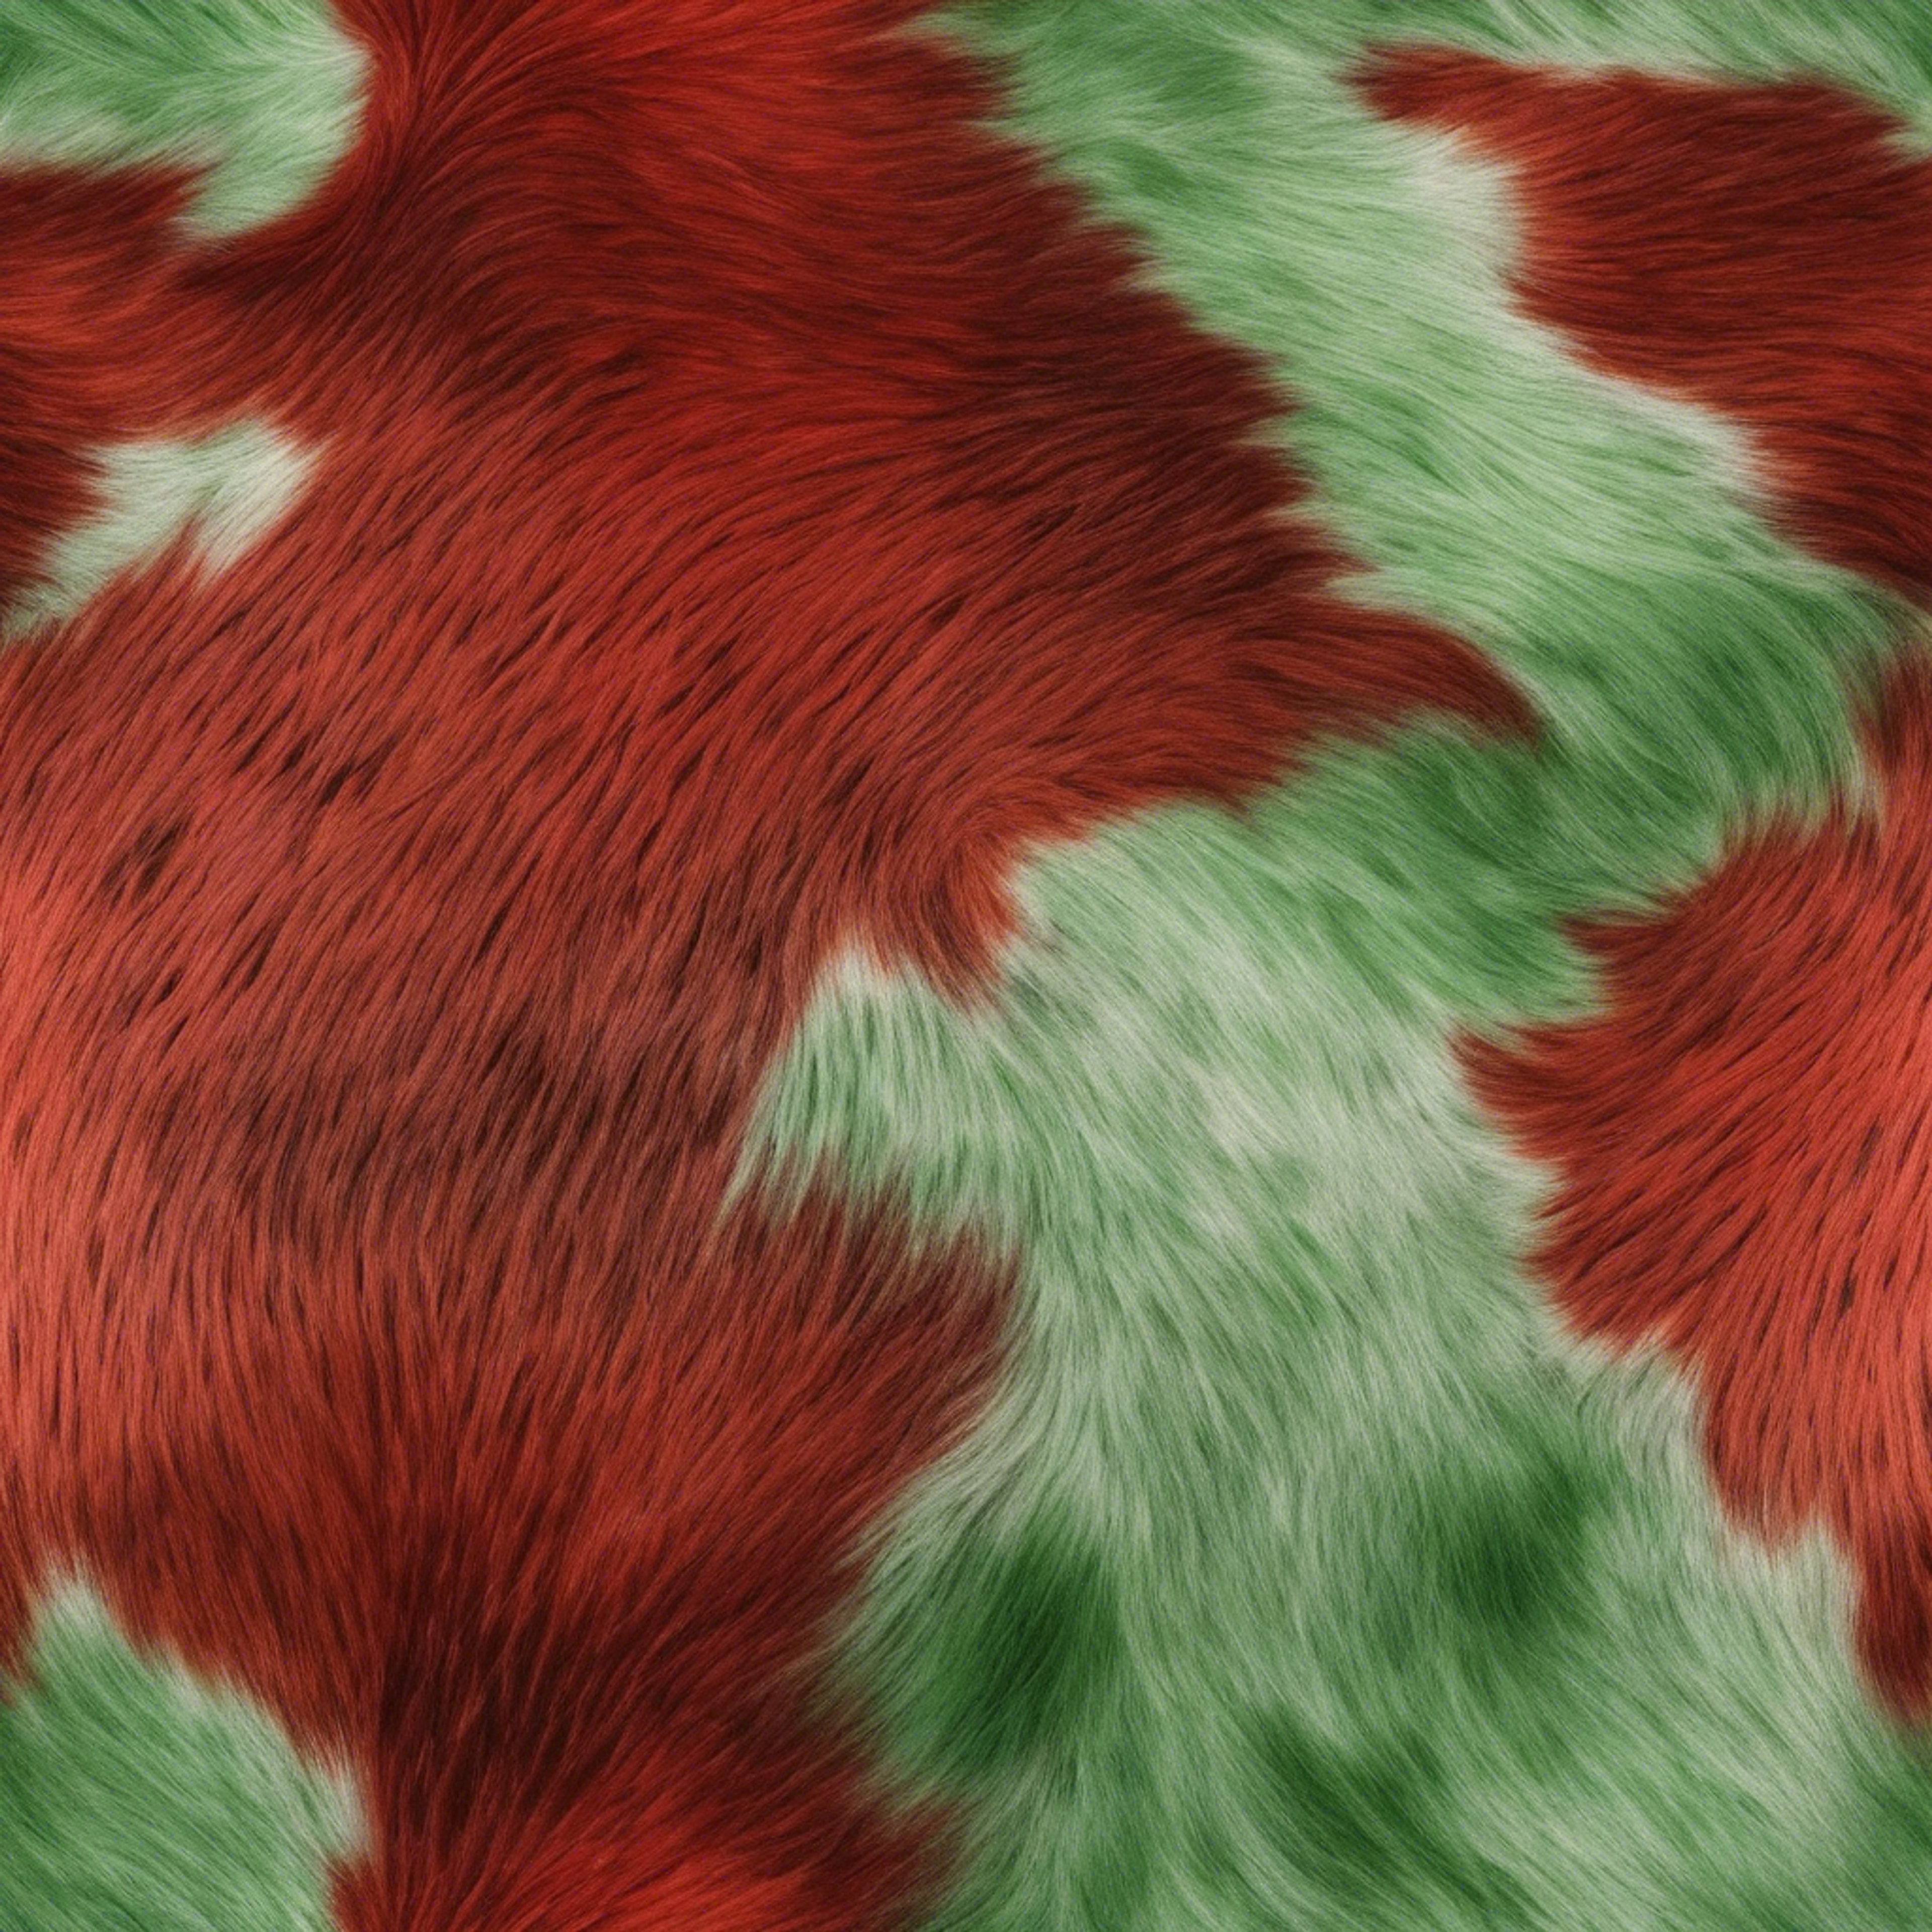 Seamless cowhide pattern art painted in bright red and green shades. Divar kağızı[3aae93f0a1ee456daf96]